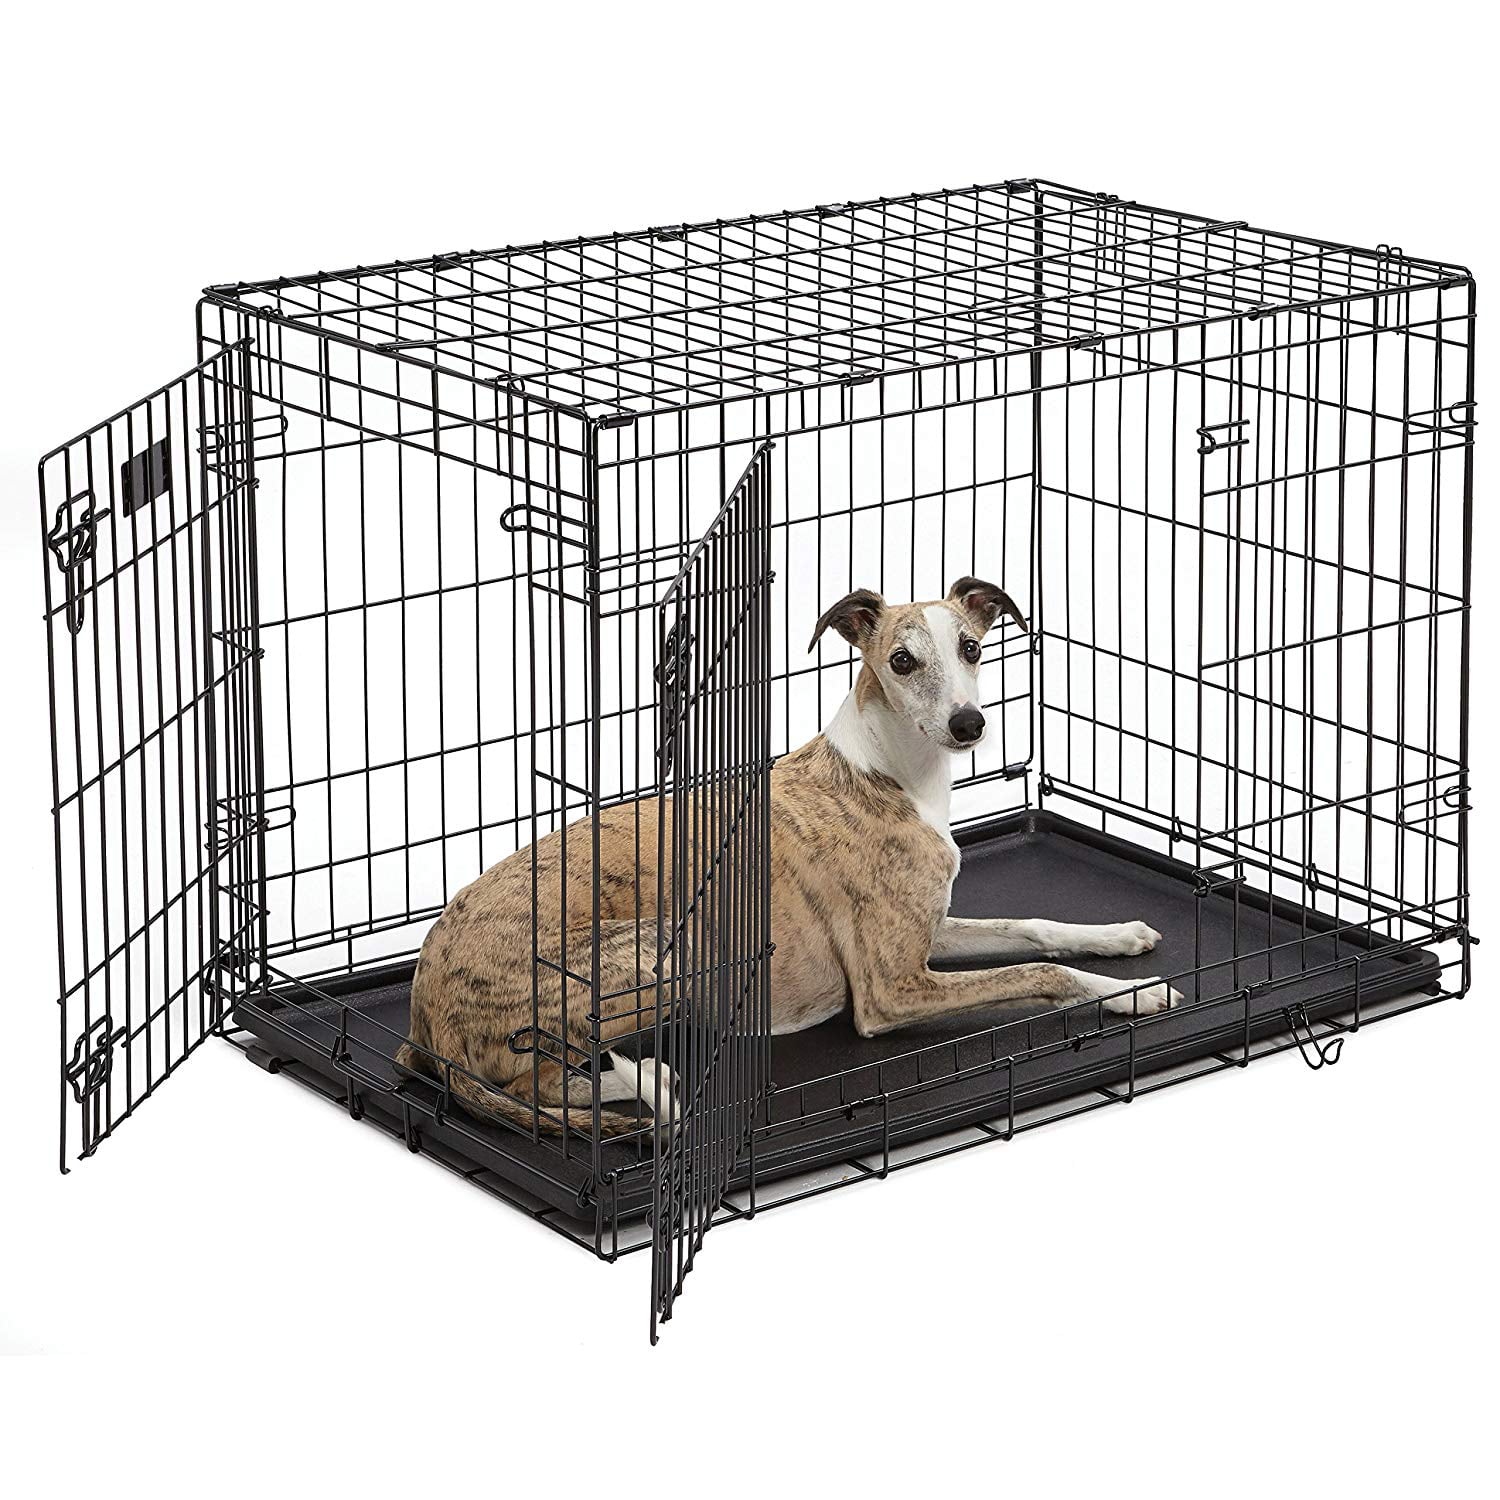 Dog Crate Dog Cage Pet Crate 42 Inch Folding Metal Pet Cage Double Door W/Divider Panel Dog Kennel Leak-Proof Plastic Tray Wire Animal Cage 